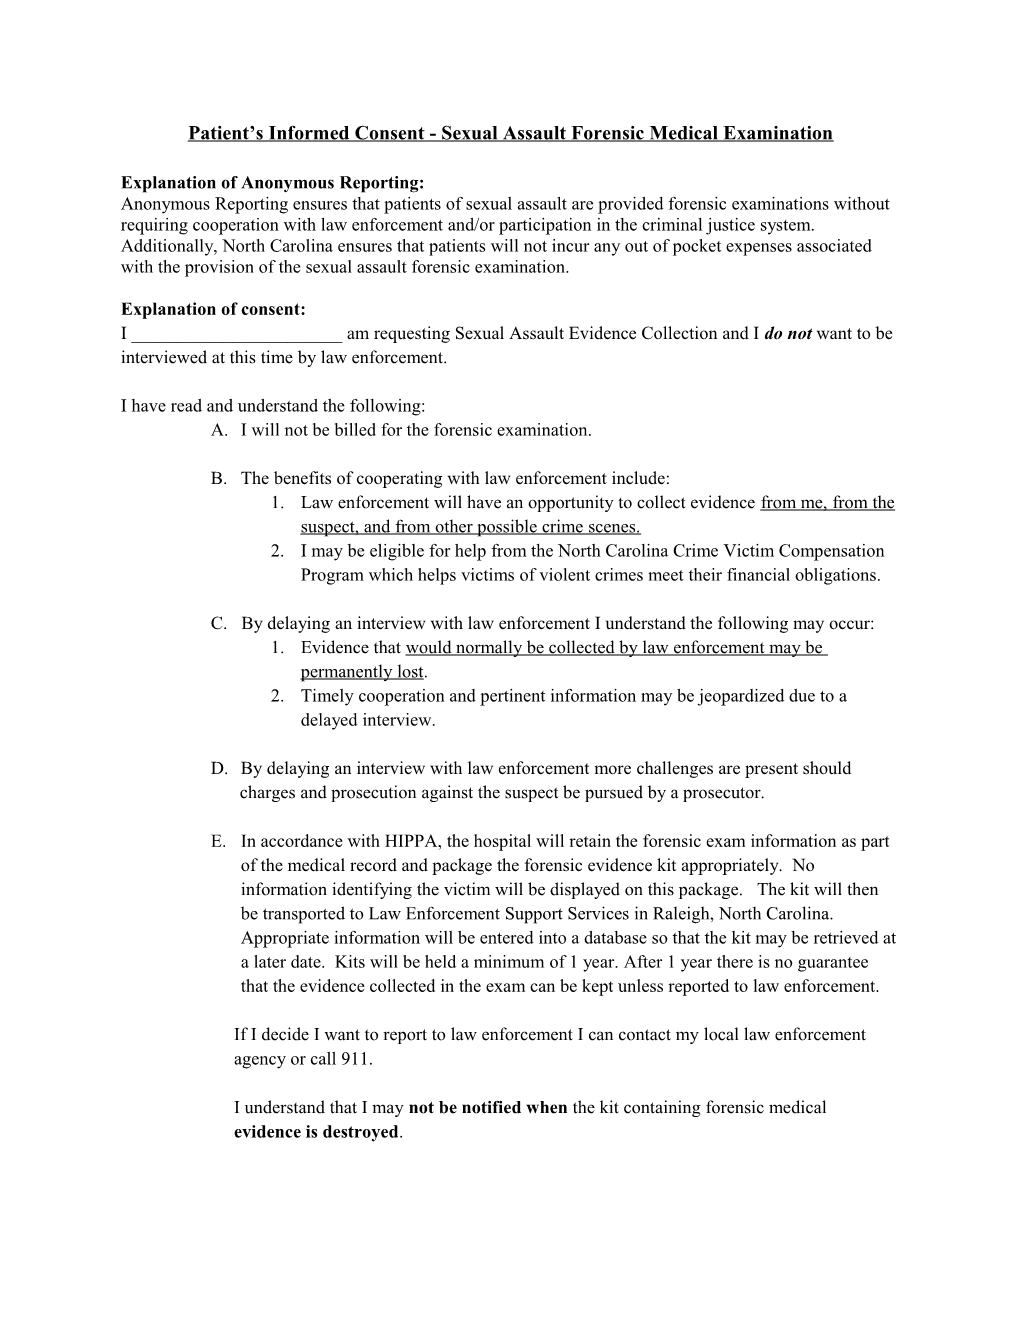 Informed Consent for Sexual Assault Evidence Collection (Within STEP 1)